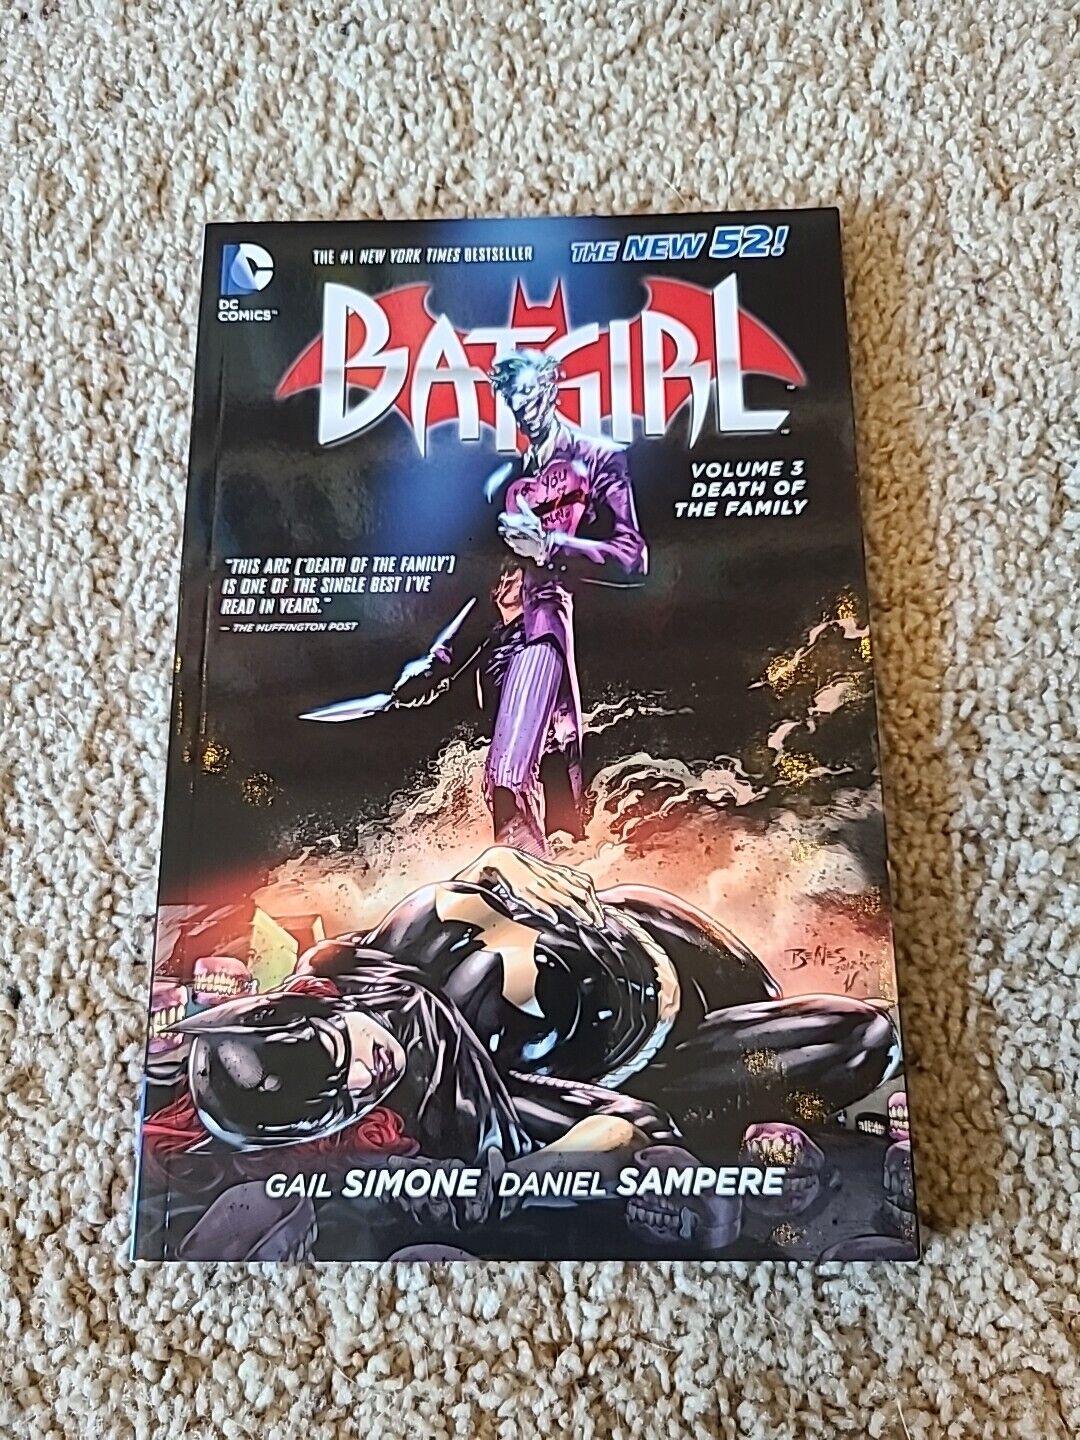 Batgirl Vol. 3: Death of the Family (The New 52) by Gail Simone: Used